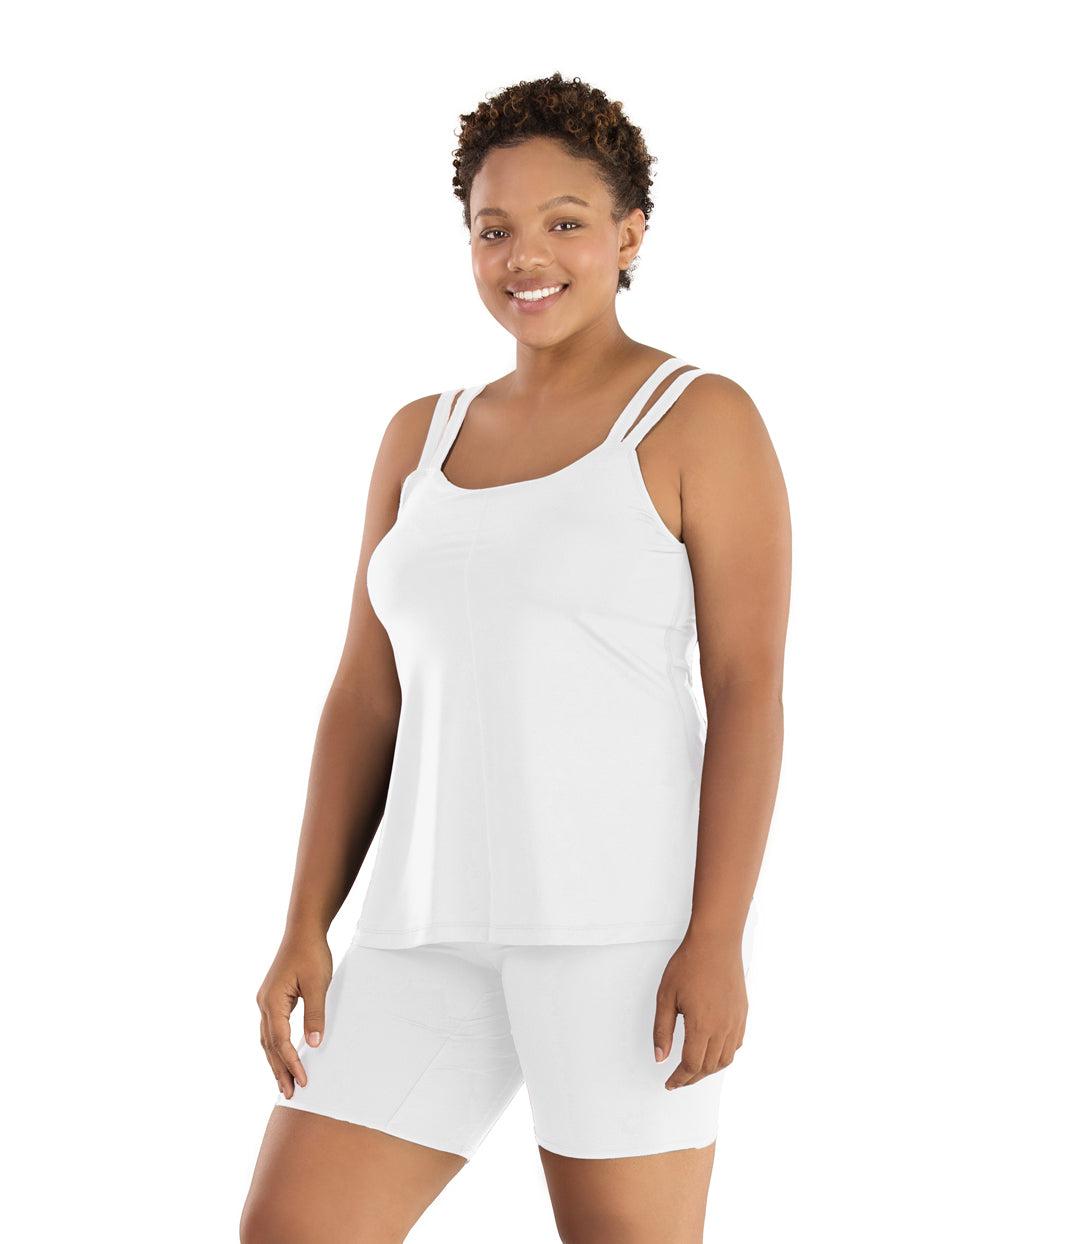 Plus size woman, facing front, wearing JunoActive plus size Junowear Hush Strappy Cami with Bra in White. The woman is wearing a pair of White Junowear Hush Boxer briefs.